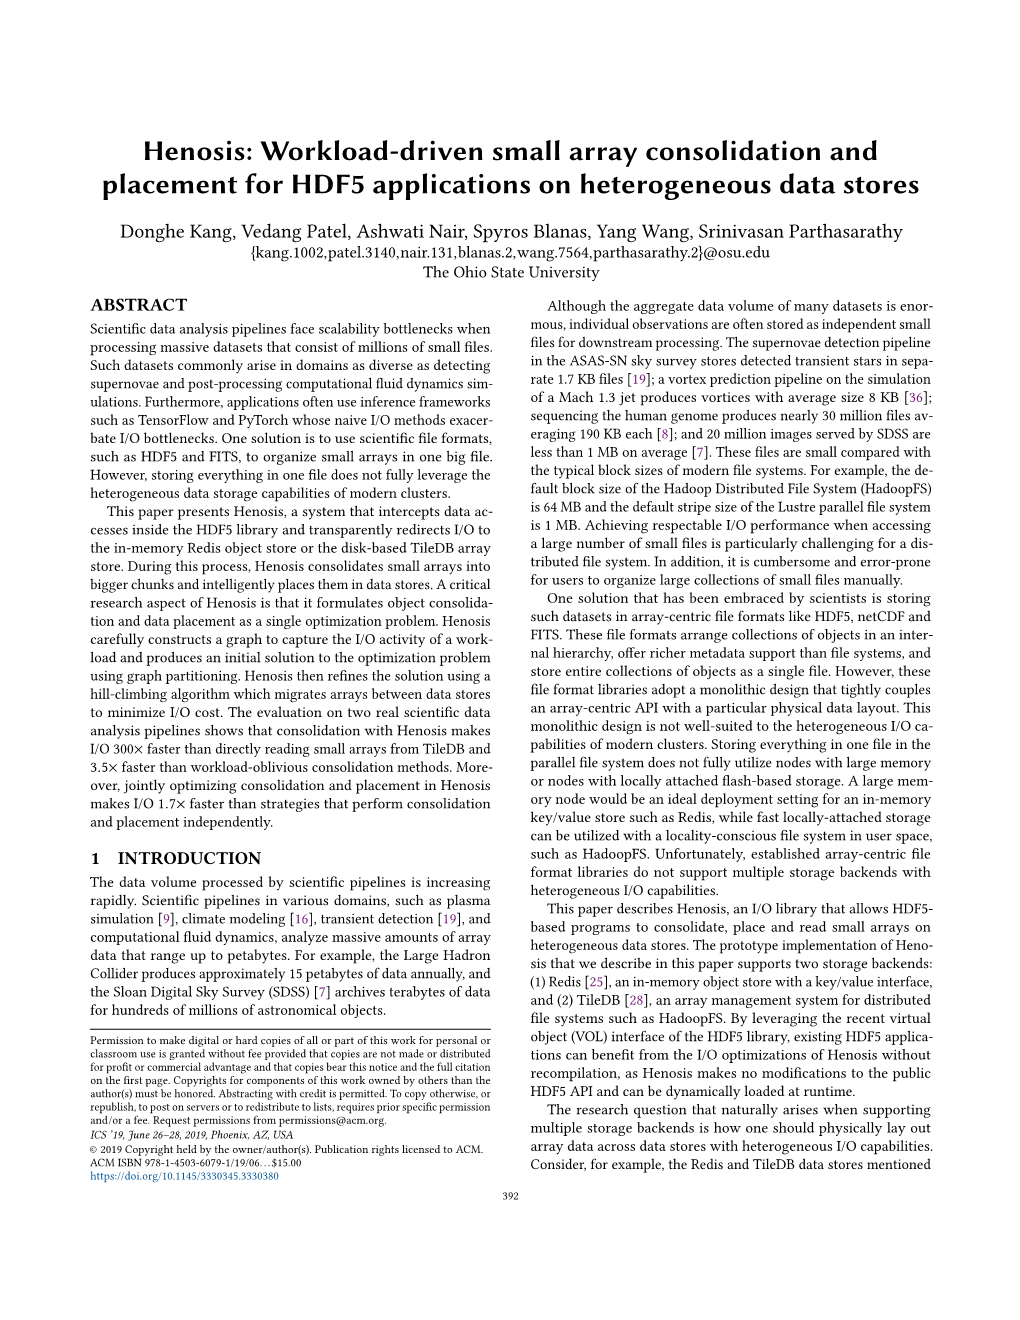 Henosis: Workload-Driven Small Array Consolidation and Placement for HDF5 Applications on Heterogeneous Data Stores